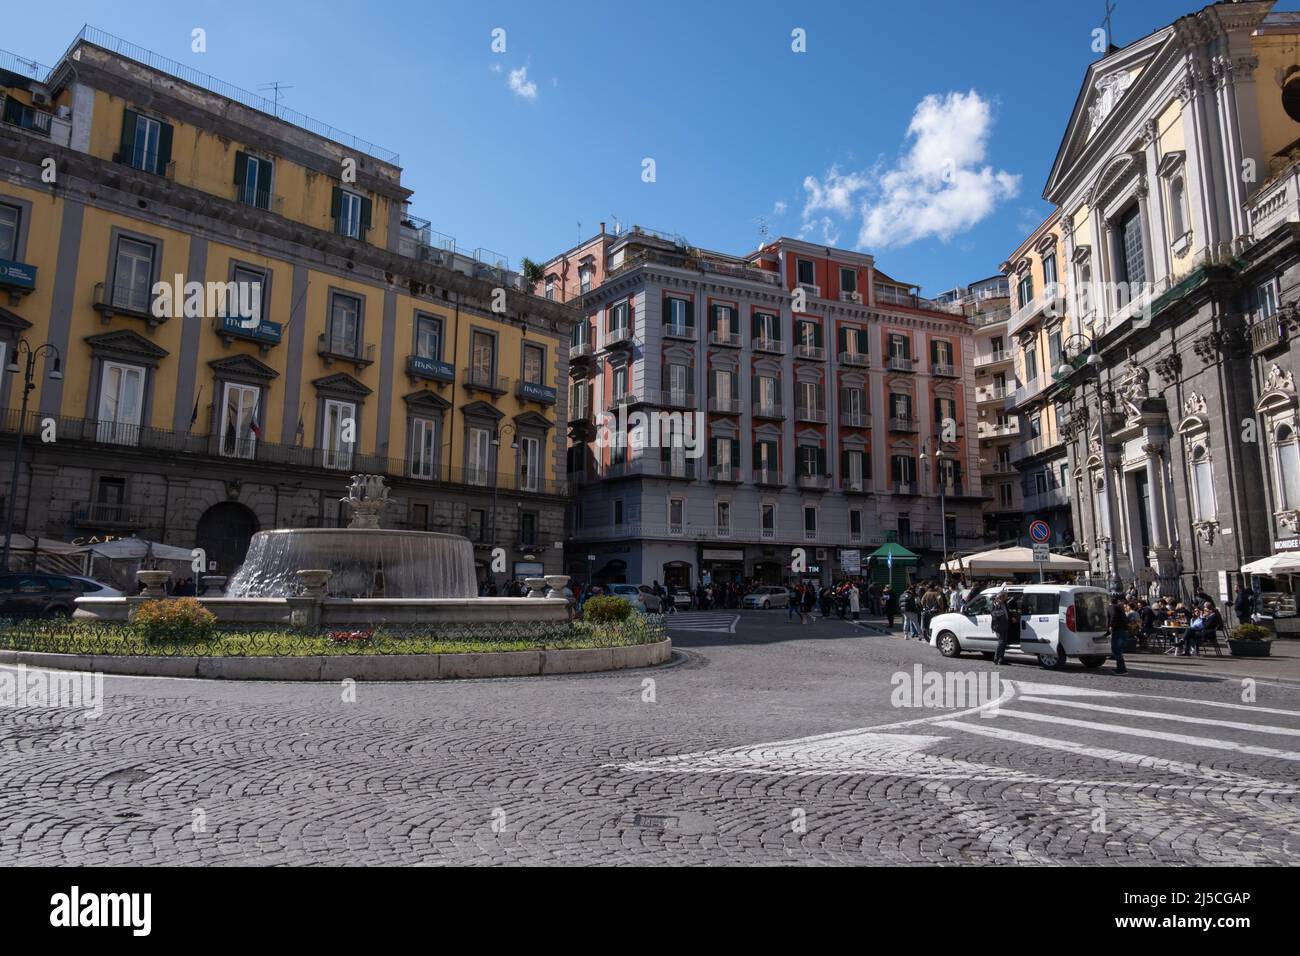 Fountain at the intersection of streets in old part of Naples Stock Photo